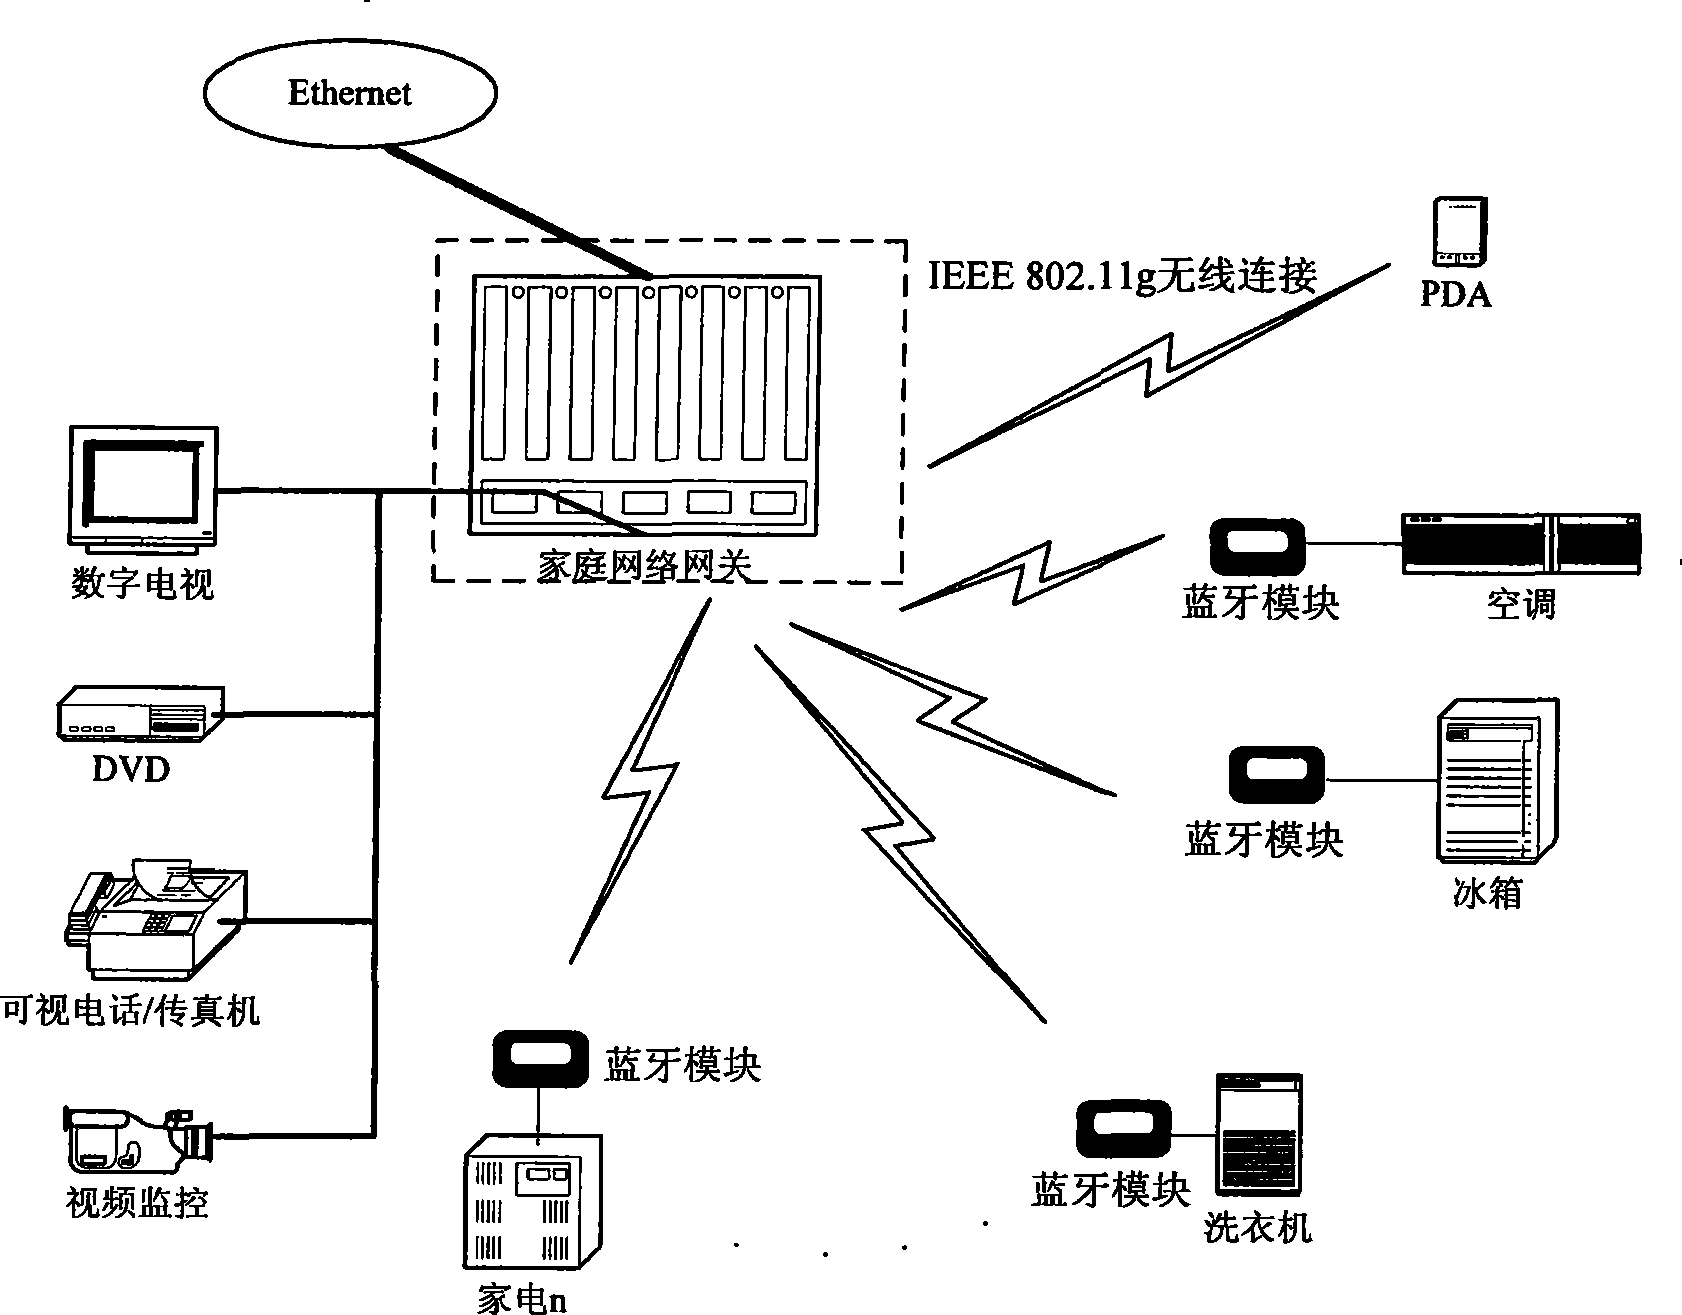 Embedded type household network gateway supporting wireless audio and video transmissions